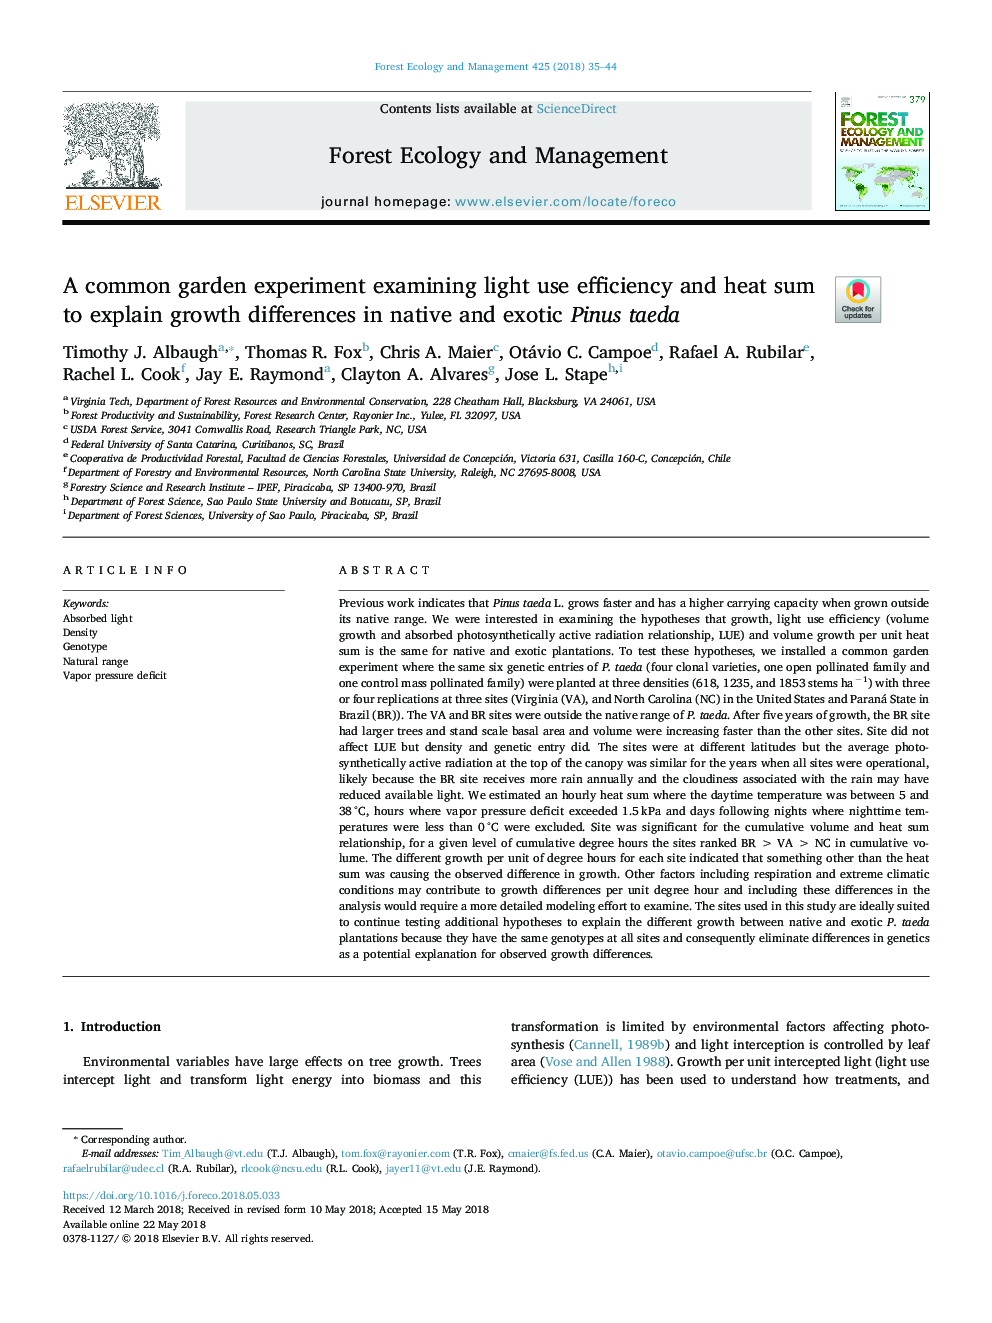 A common garden experiment examining light use efficiency and heat sum to explain growth differences in native and exotic Pinus taeda